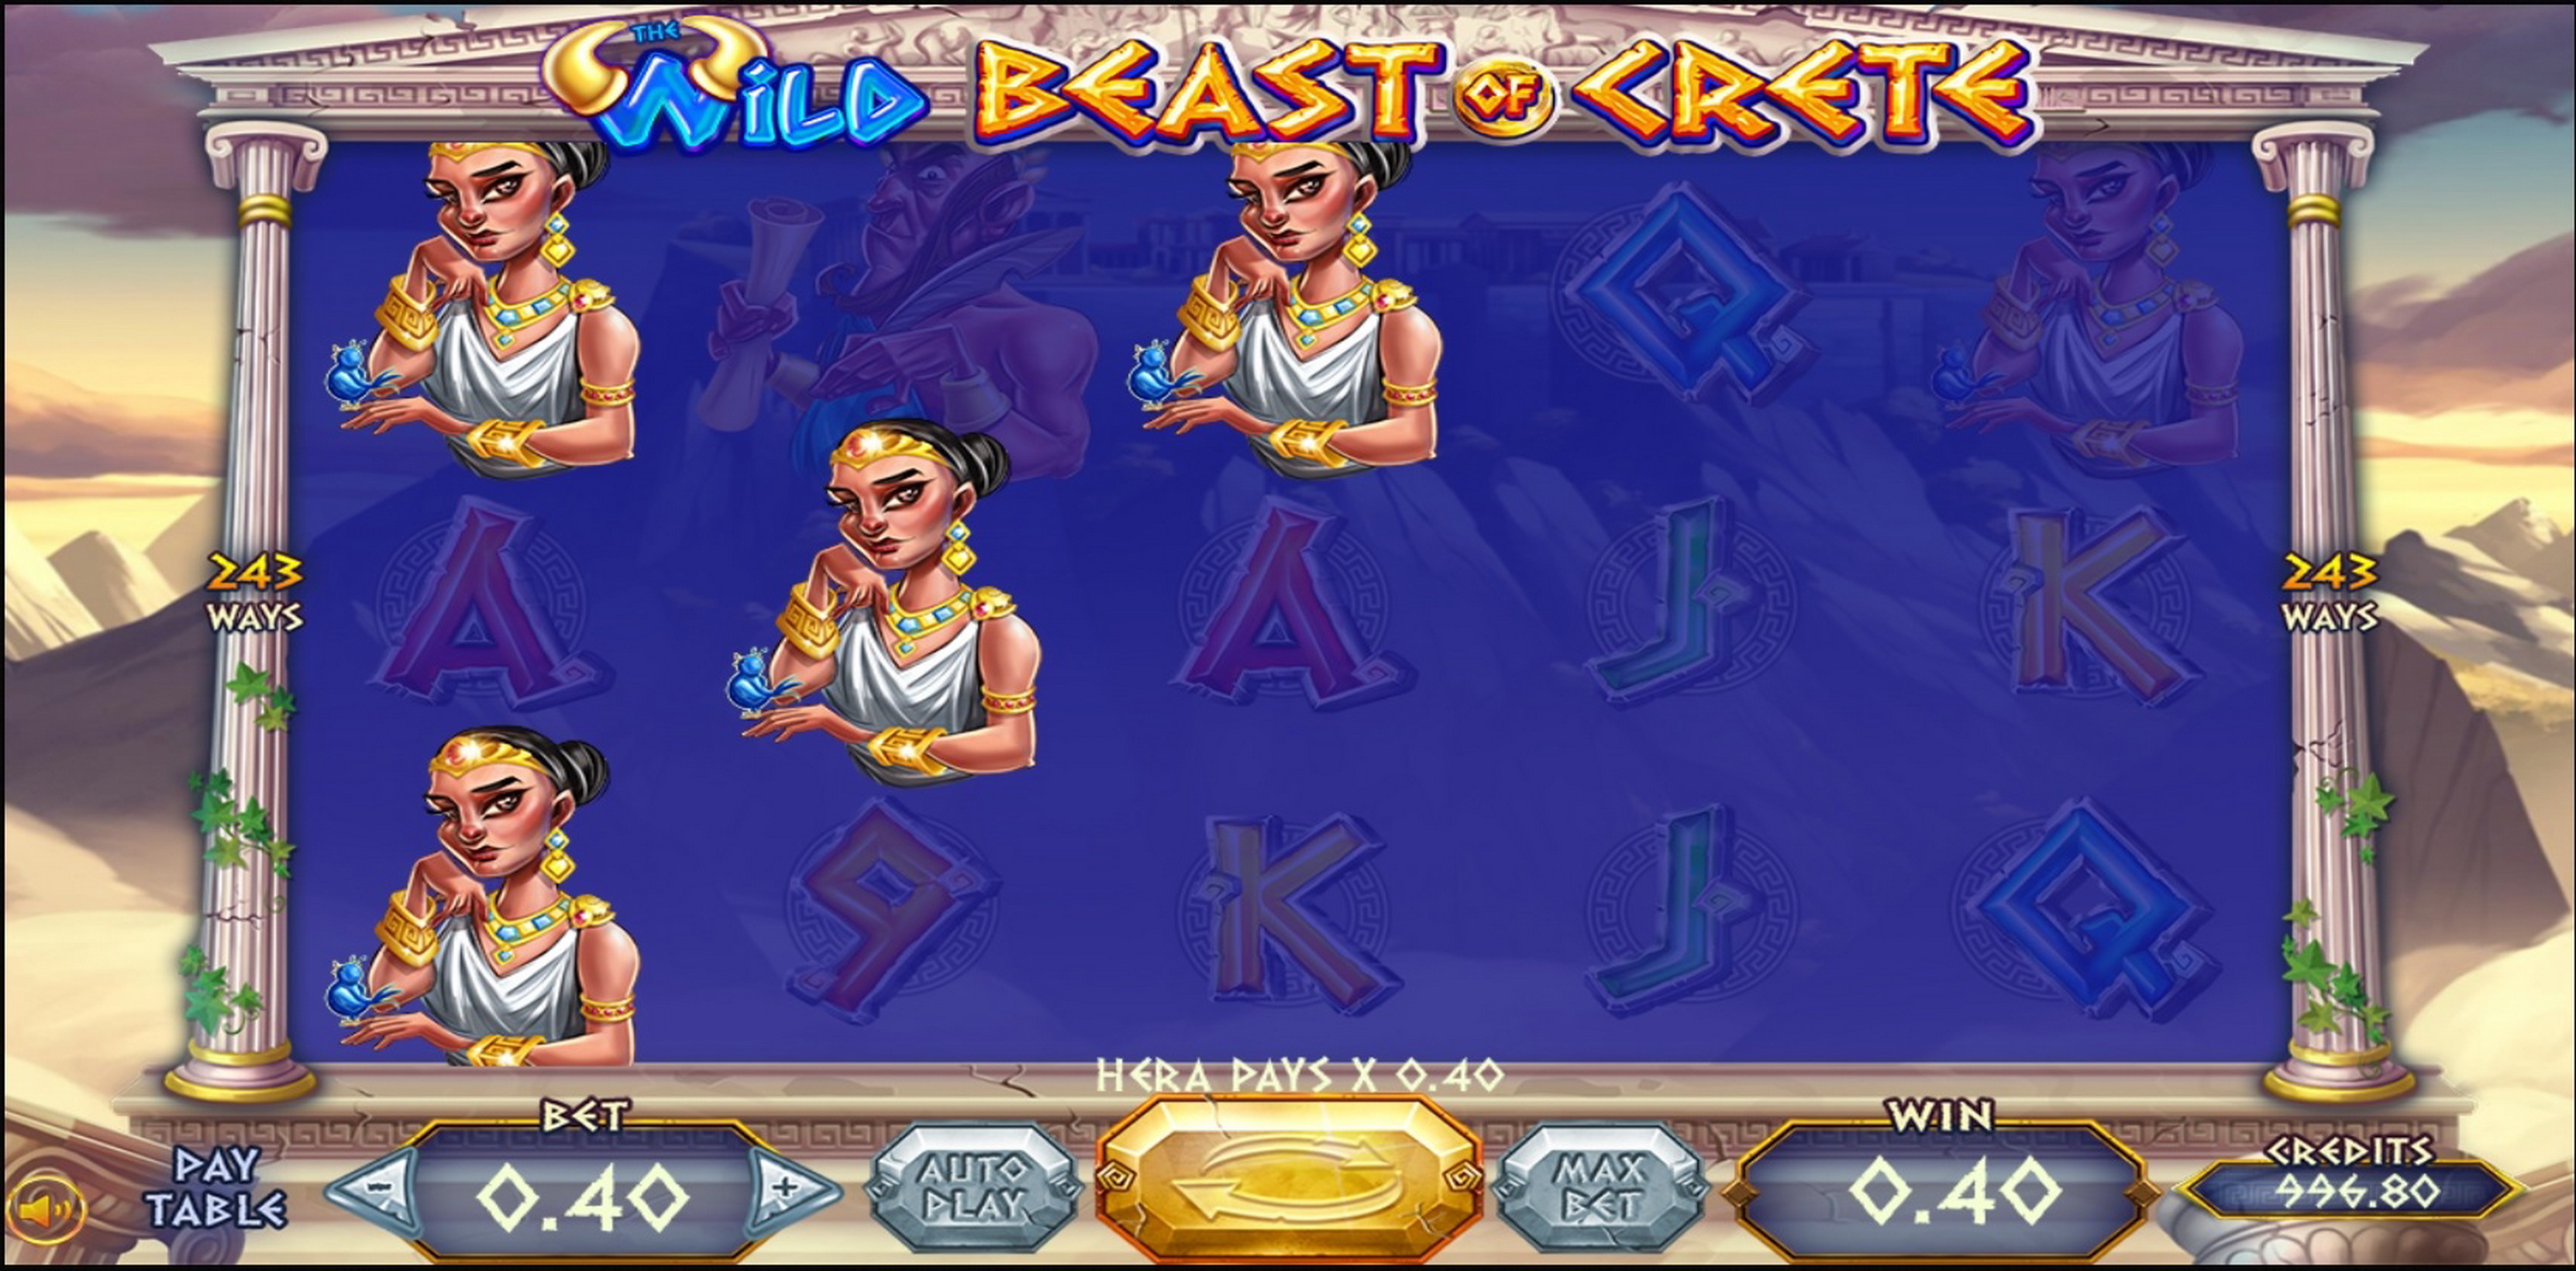 Win Money in Wild Beast of Crete Free Slot Game by Felix Gaming